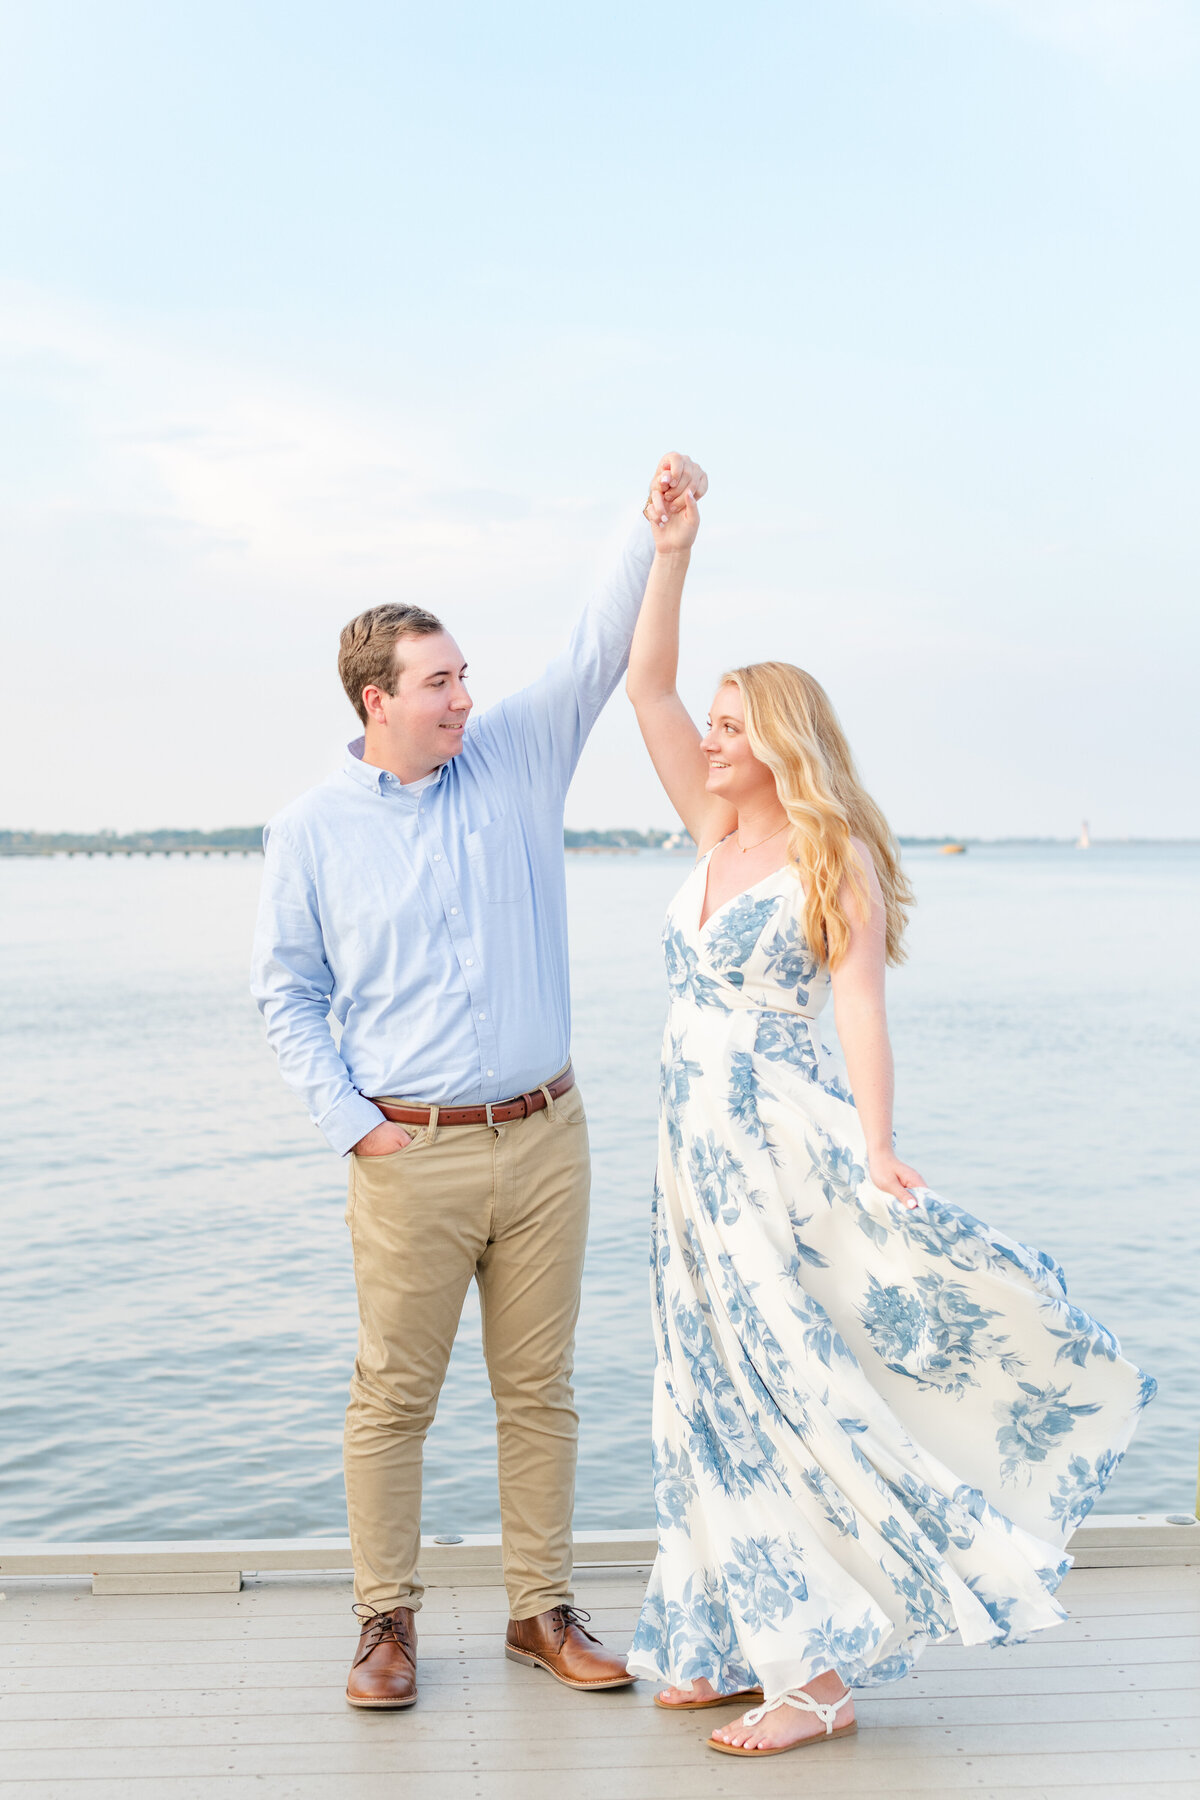 Caitlin+Mike_Engagement_NorthPointStatePark_26437